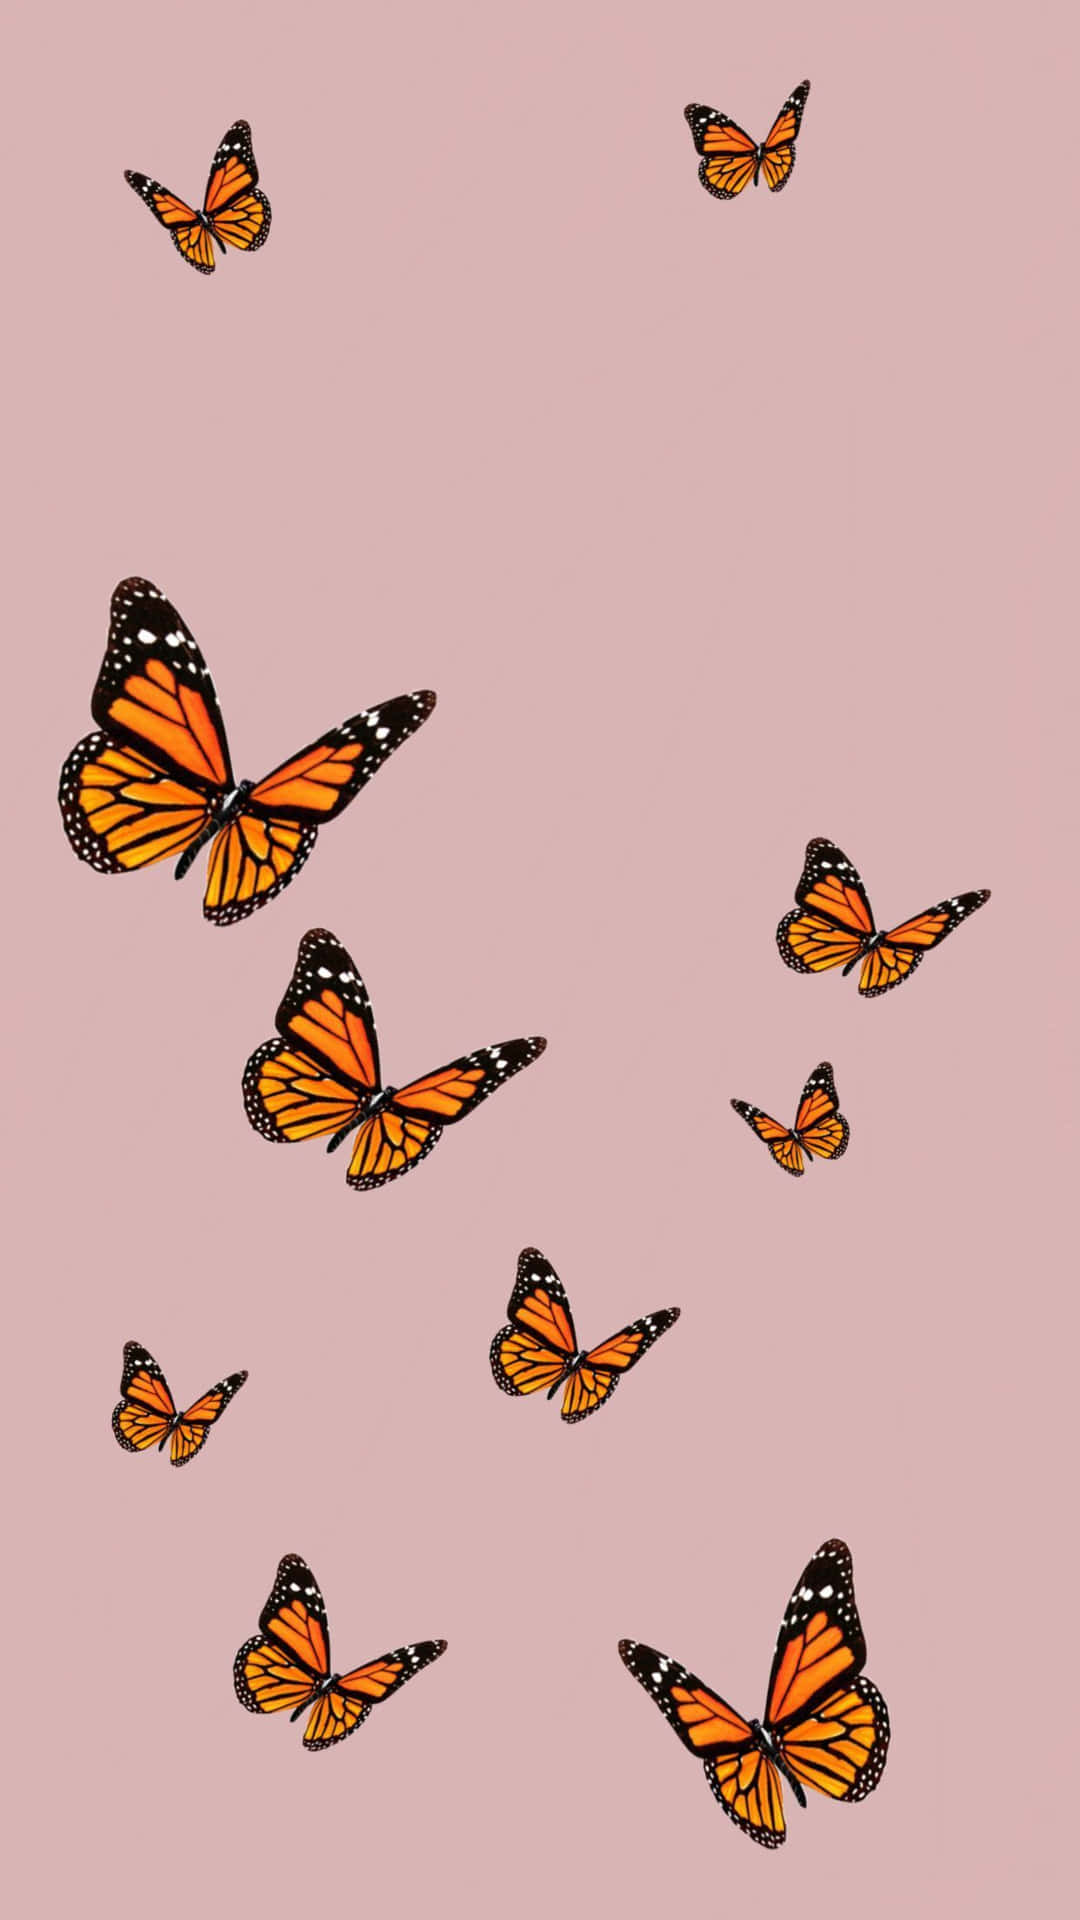 Let's be beautiful and free like a butterfly! Wallpaper